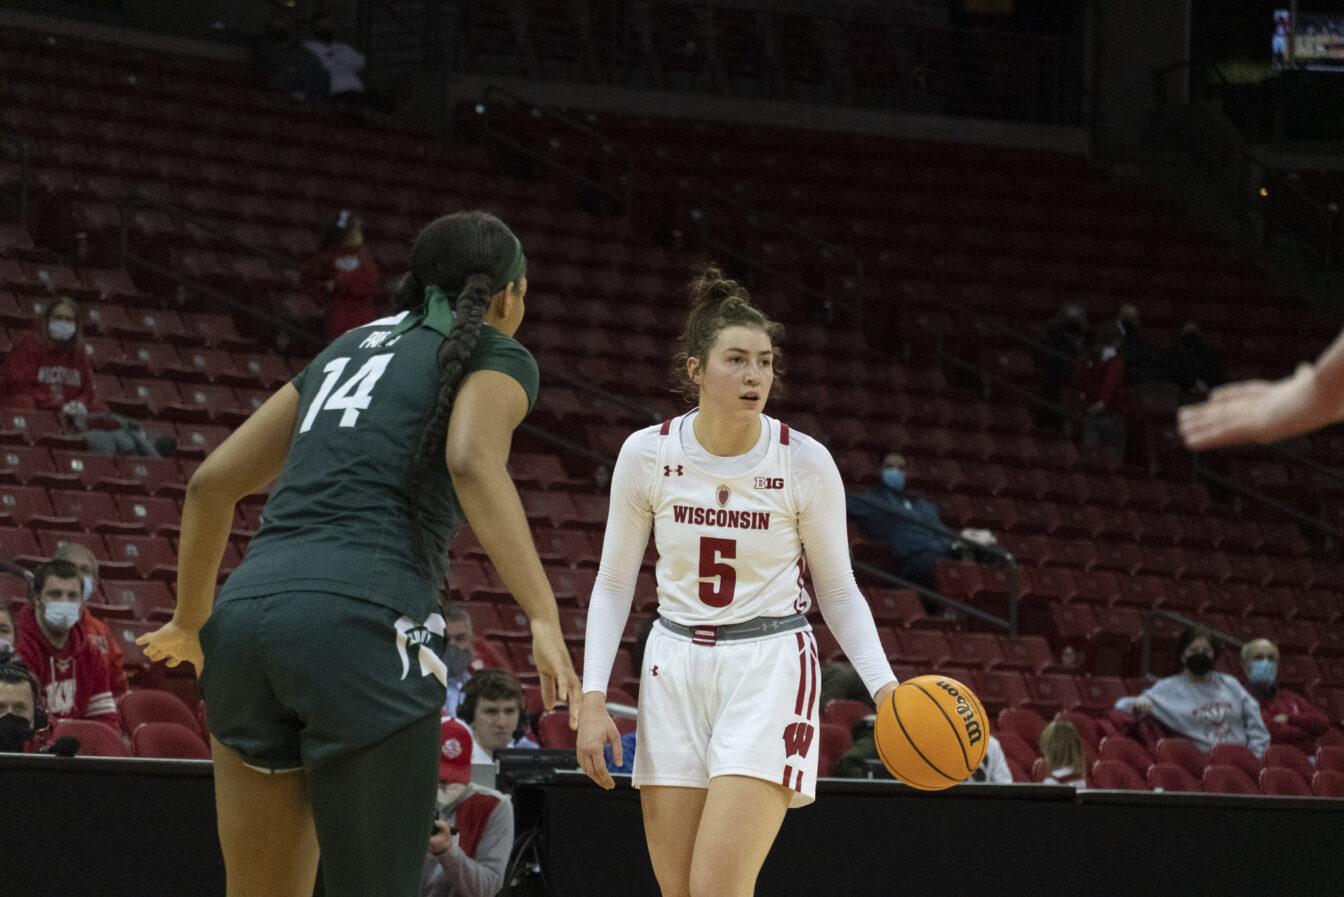 Women’s Basketball: UW struggles offensively, loses to Ohio State